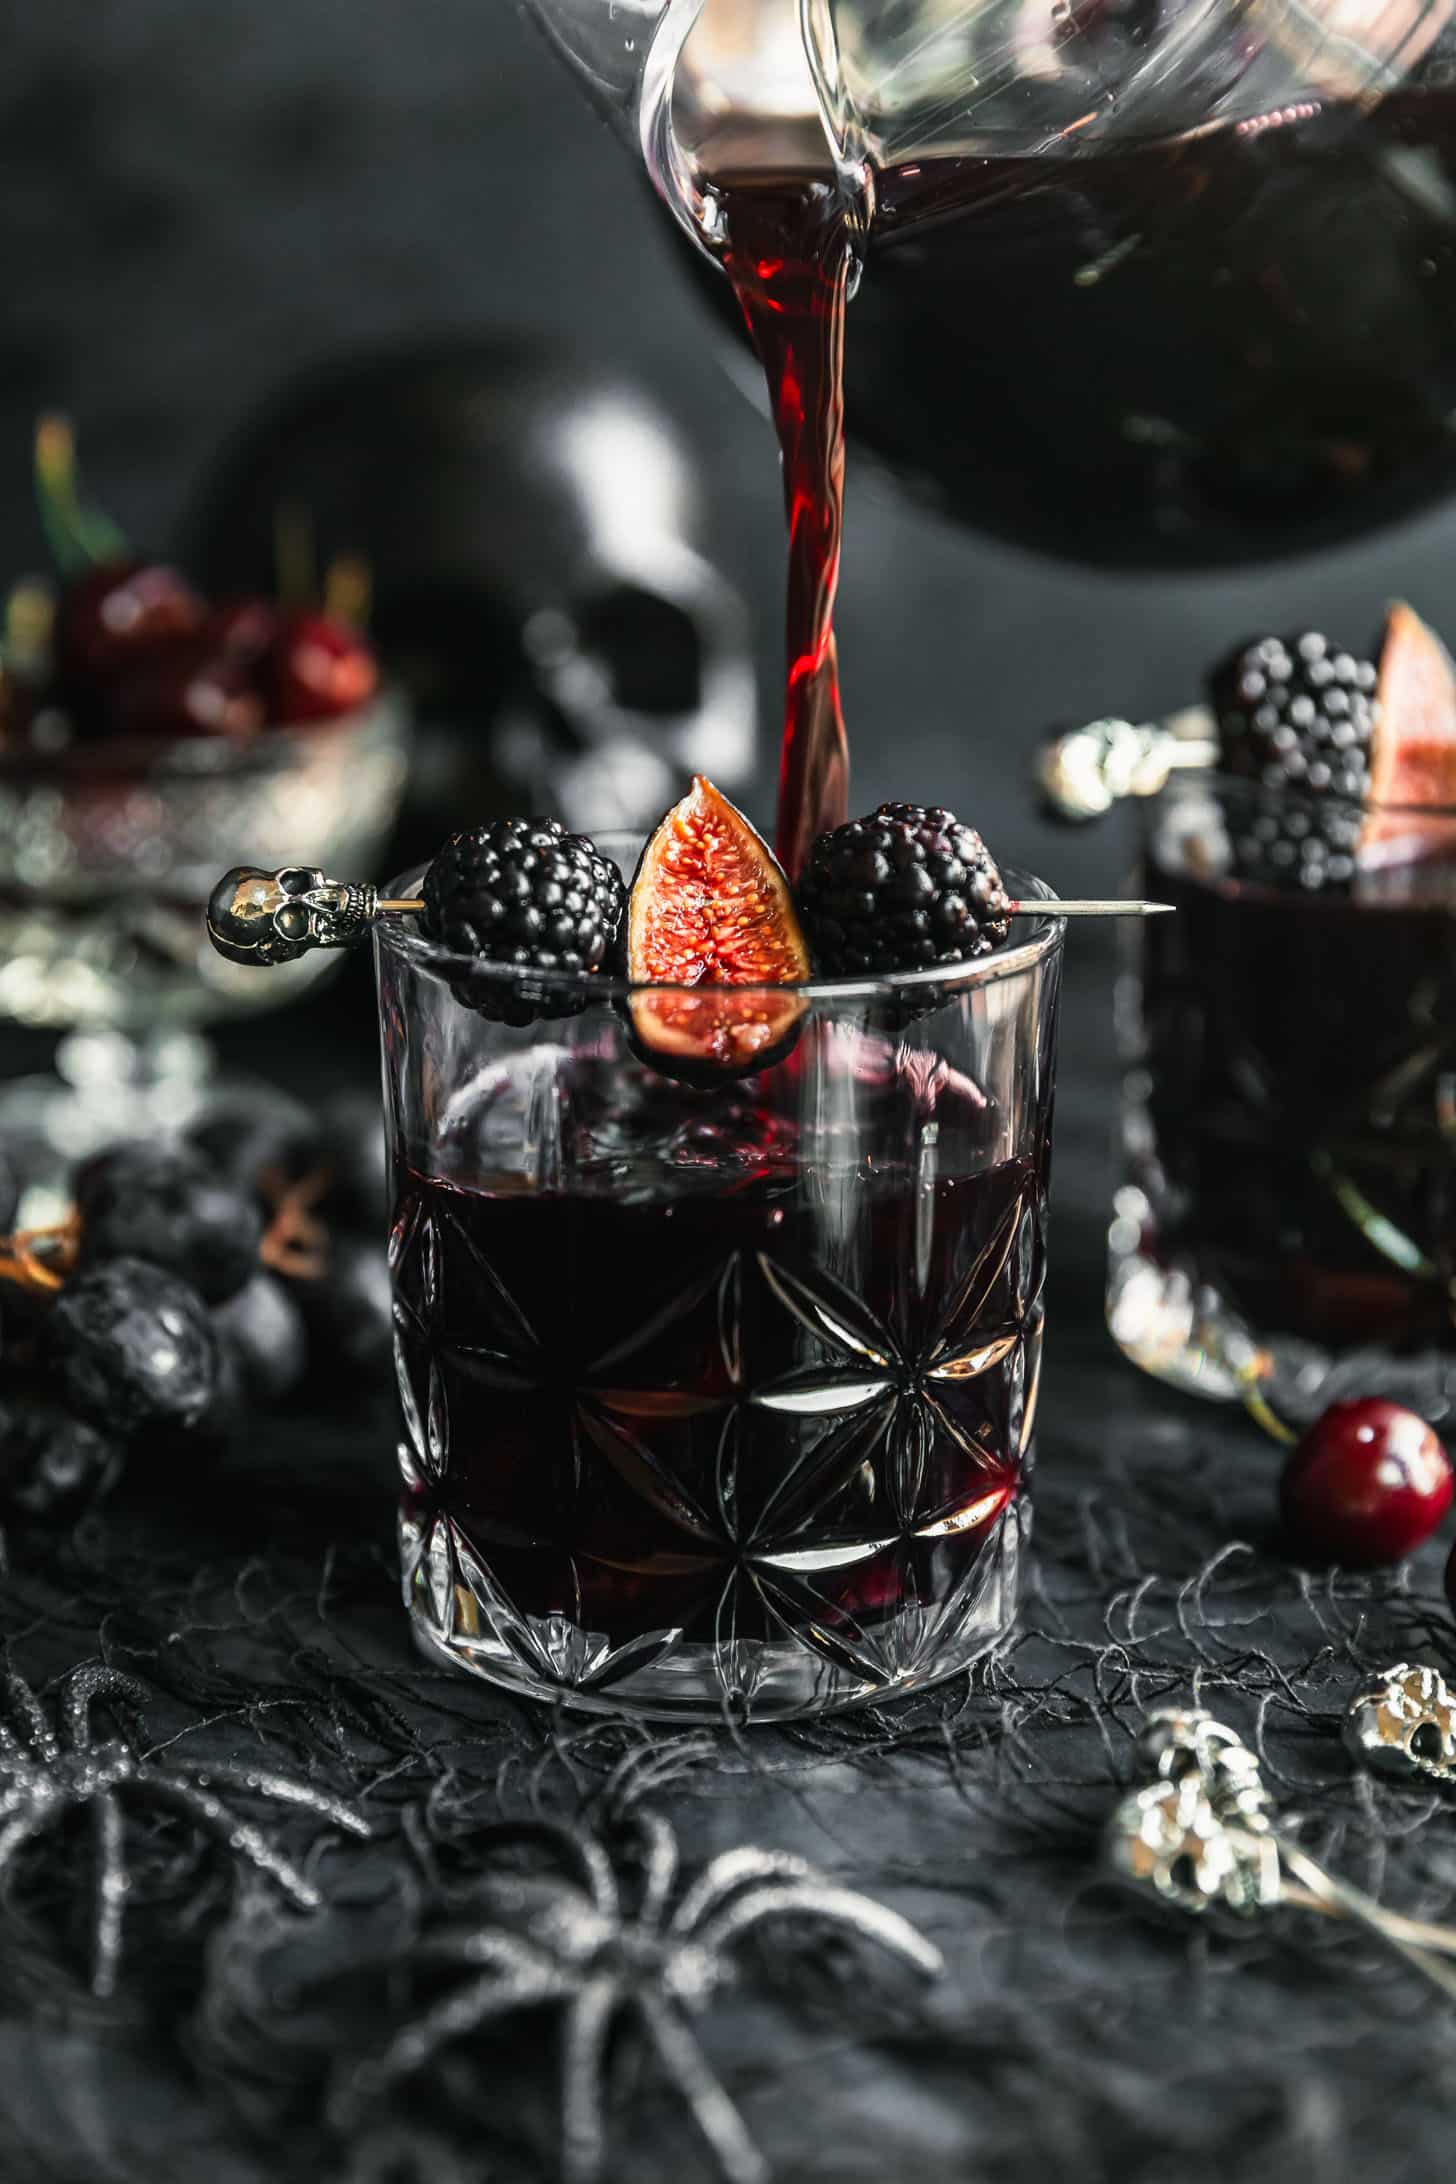 A pitcher pouring black Halloween sangria into a glass on a black counter next to grapes, cherries, plastic spiders, and a black skull.